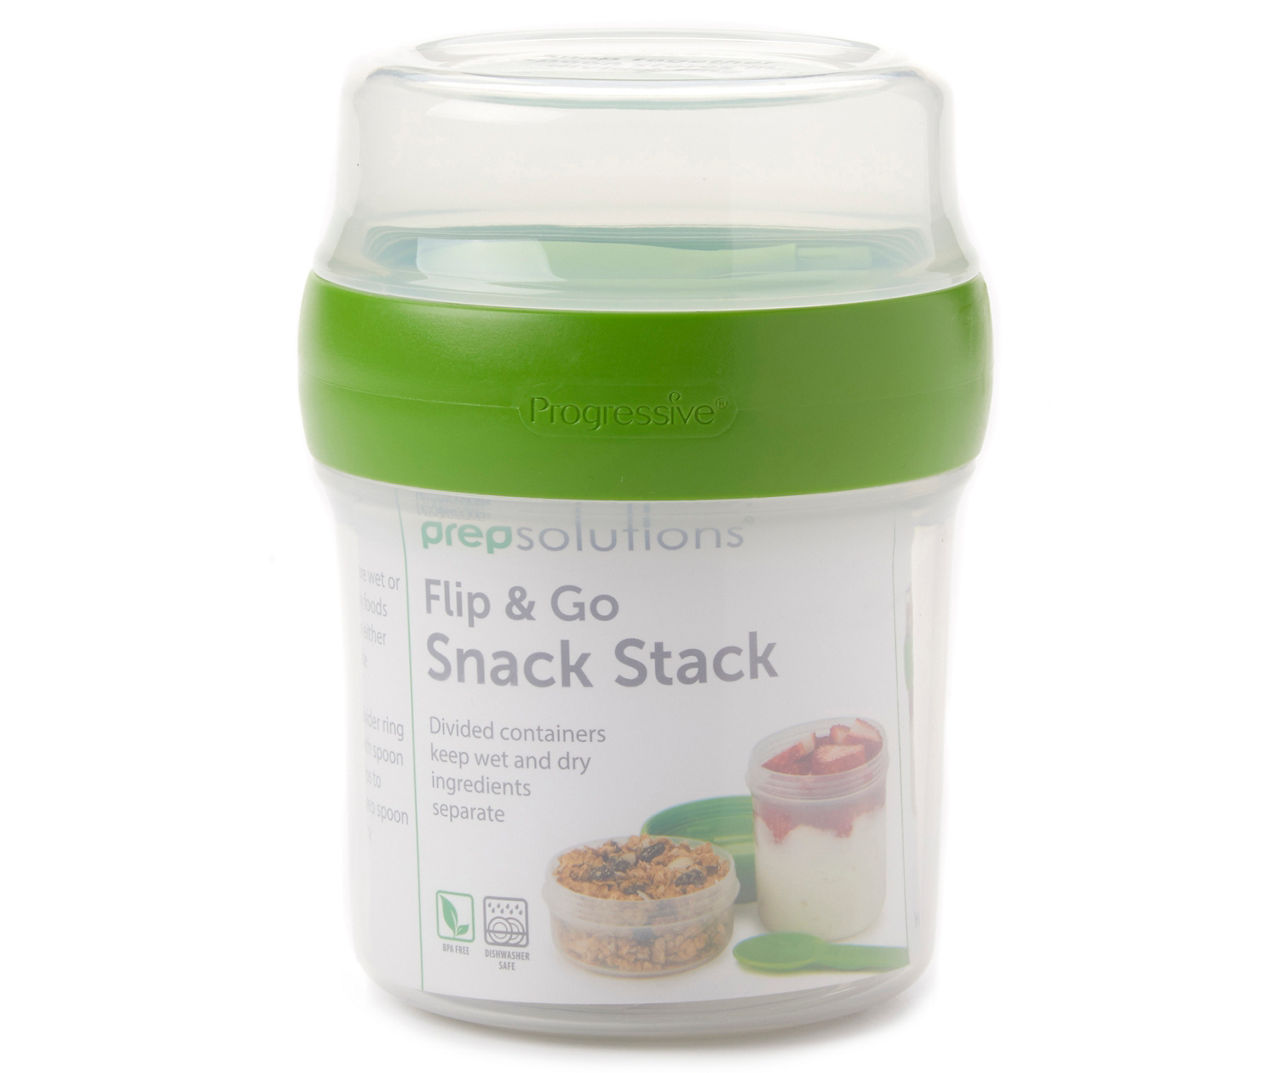 Progressive Prep Solutions Shake & Snack Healthy To Go Container - NWT